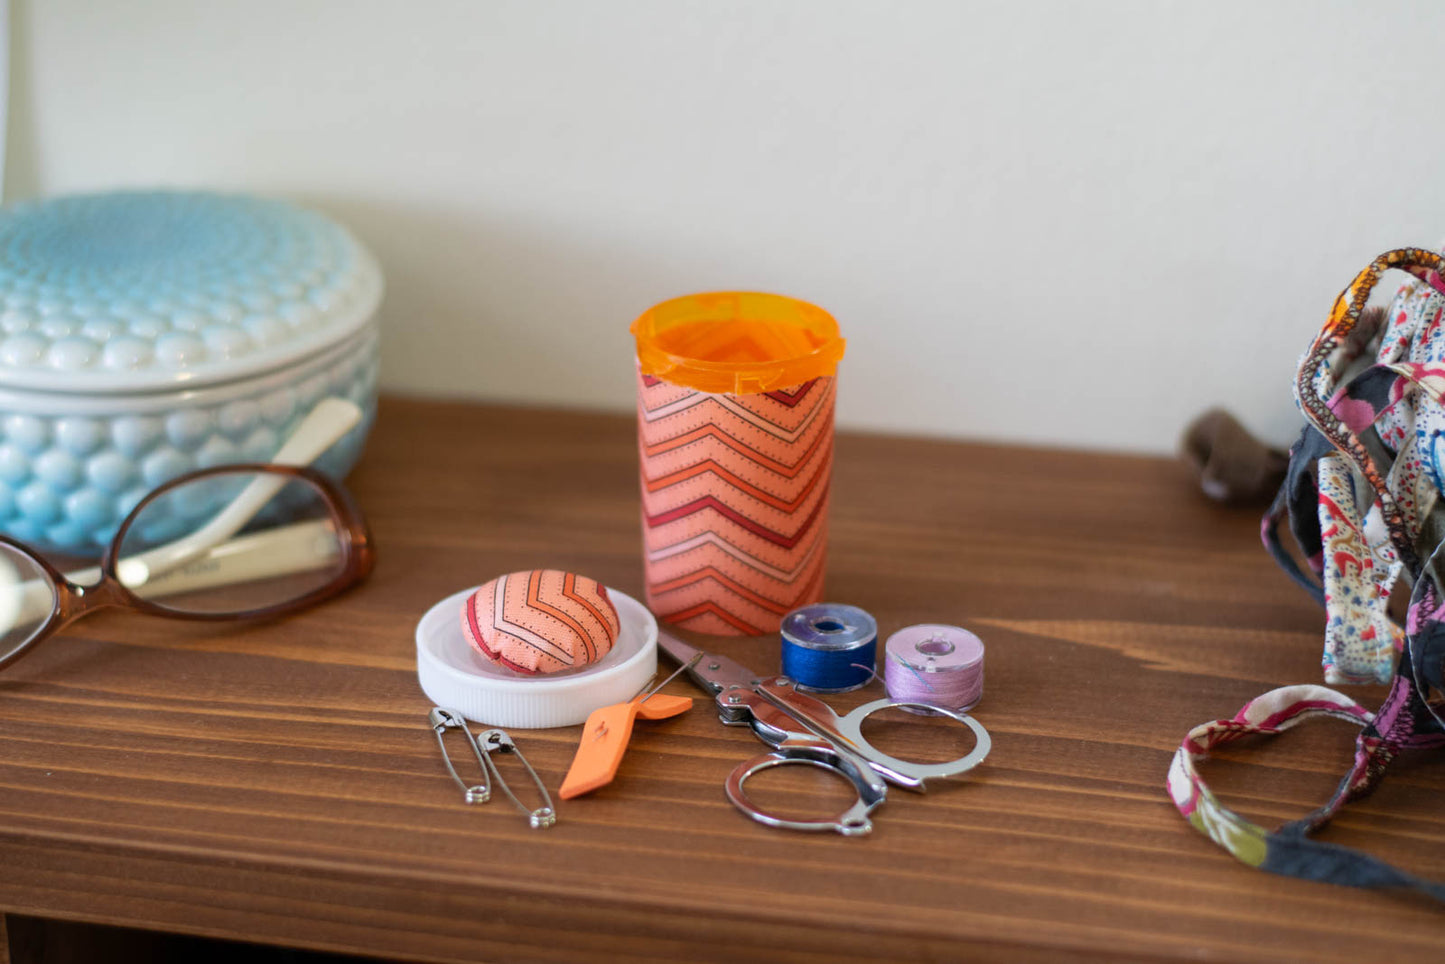 Upcycled Prescription Bottle Sewing Kit — Red and Orange Chevron with Dots on Pink, 2.75" high, open with contents